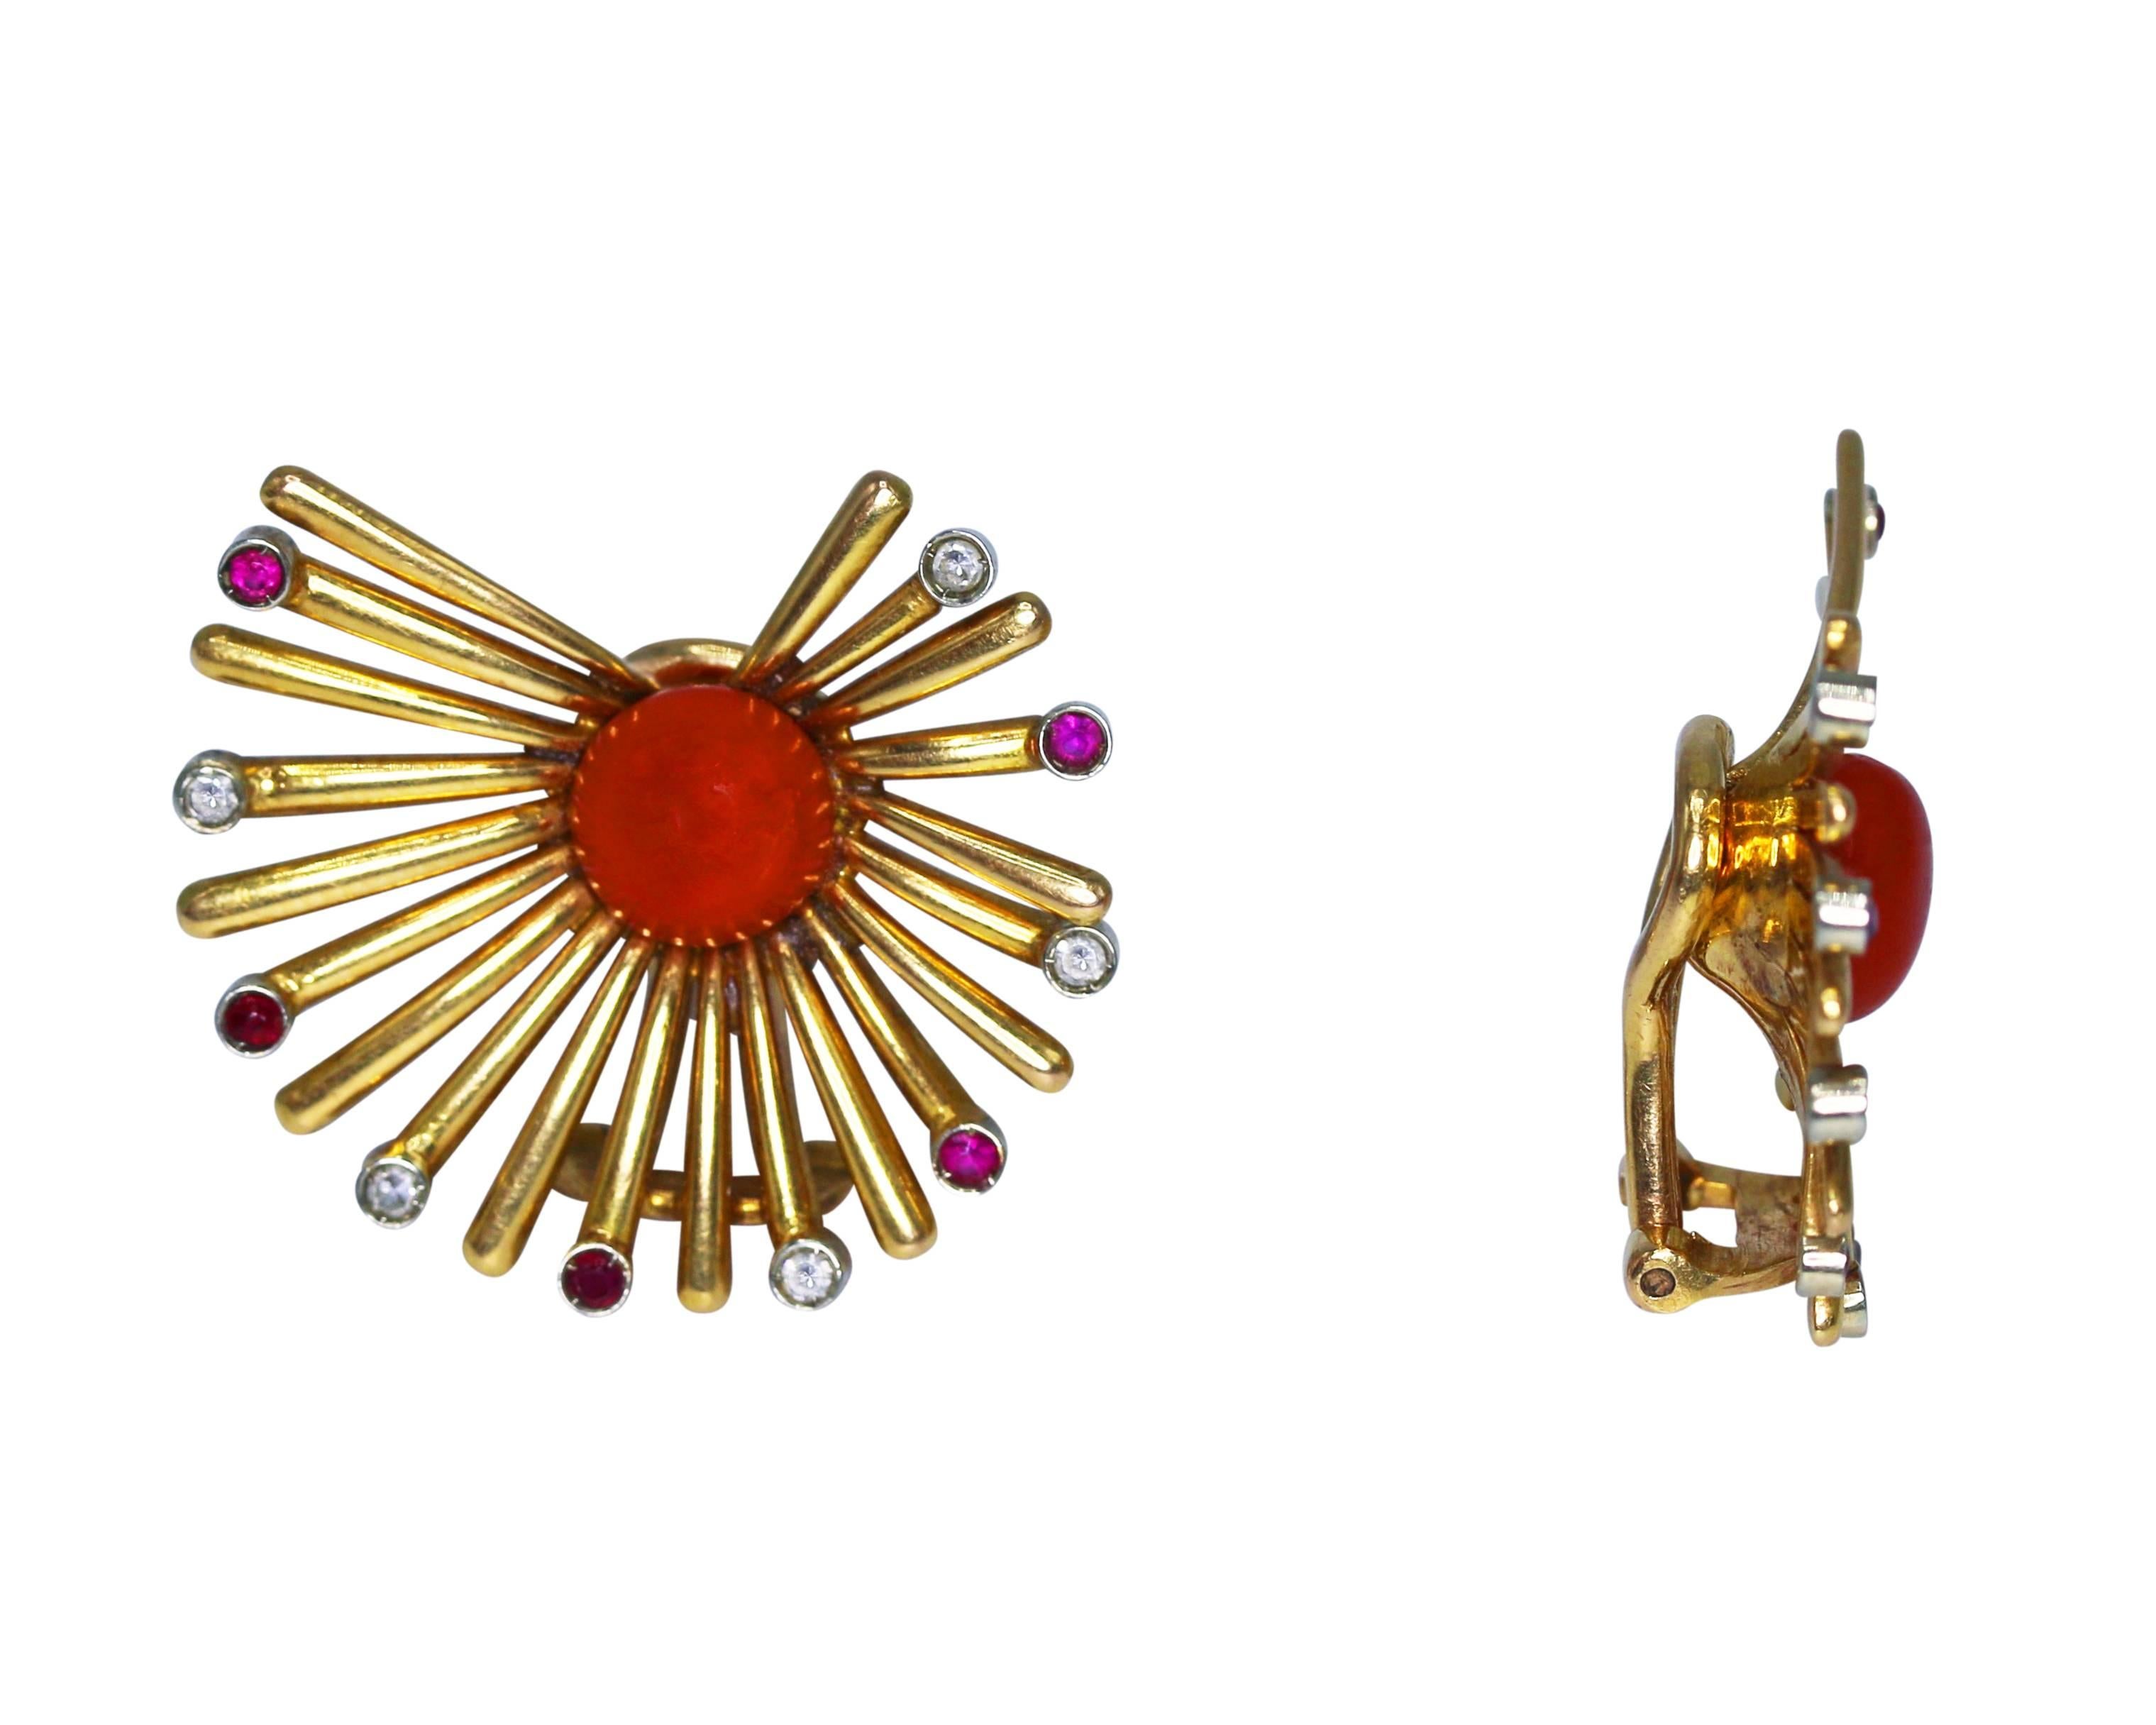 Fantastic earclips from the 1950s designed as fans with coral cabochon centers of rich red color, accented by polished gold tendrils alternately set with small round diamonds and rubies, gross weight 11.0 grams, measuring 1 1/8 by 1 inches, mounted